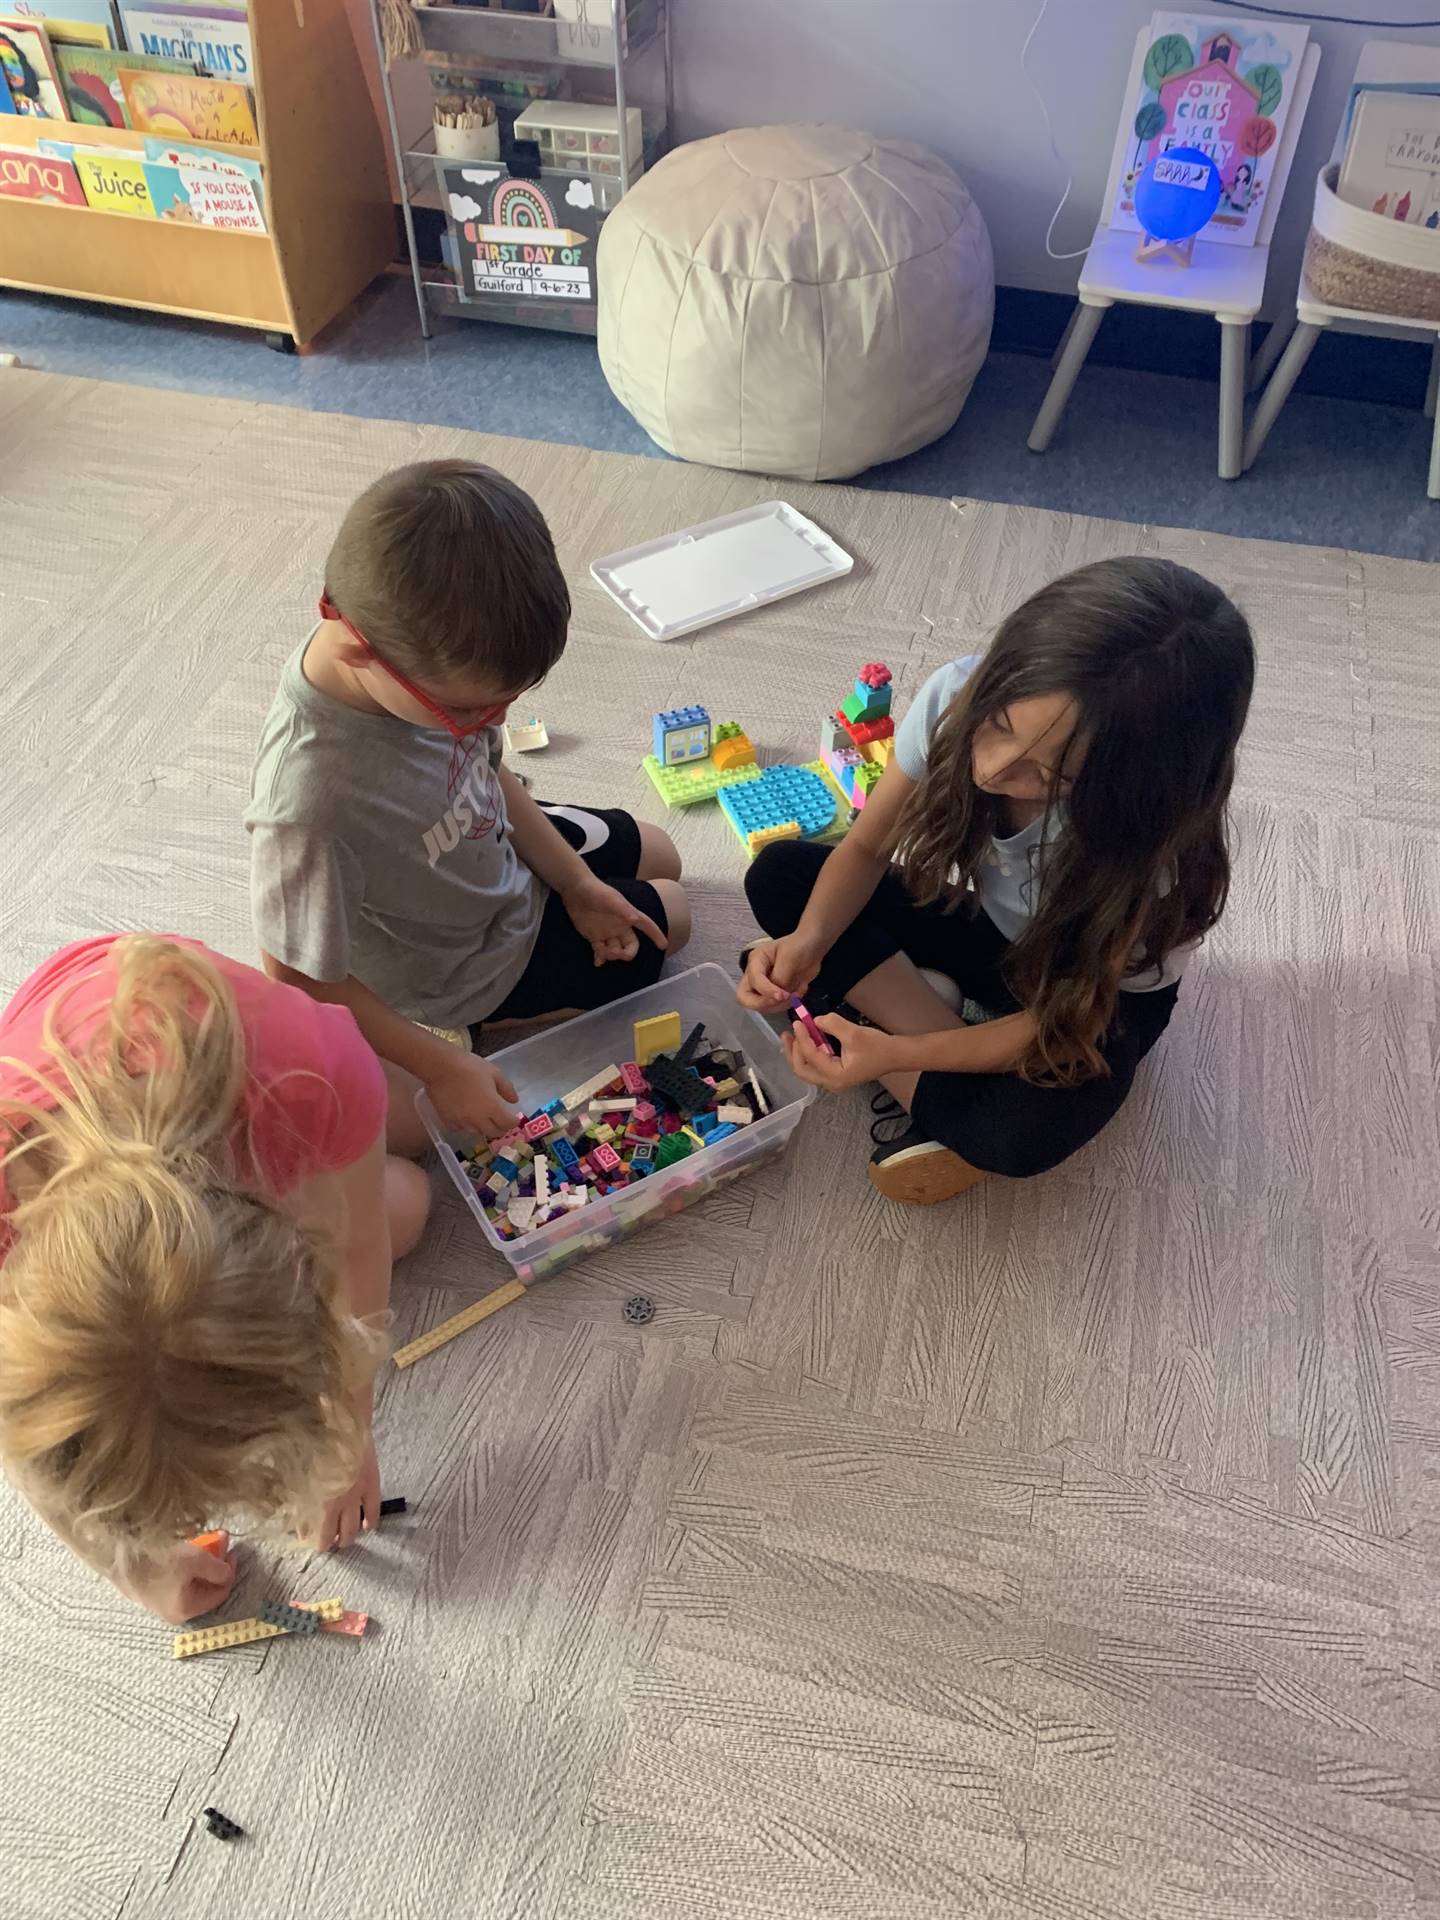 3 students playing with toys